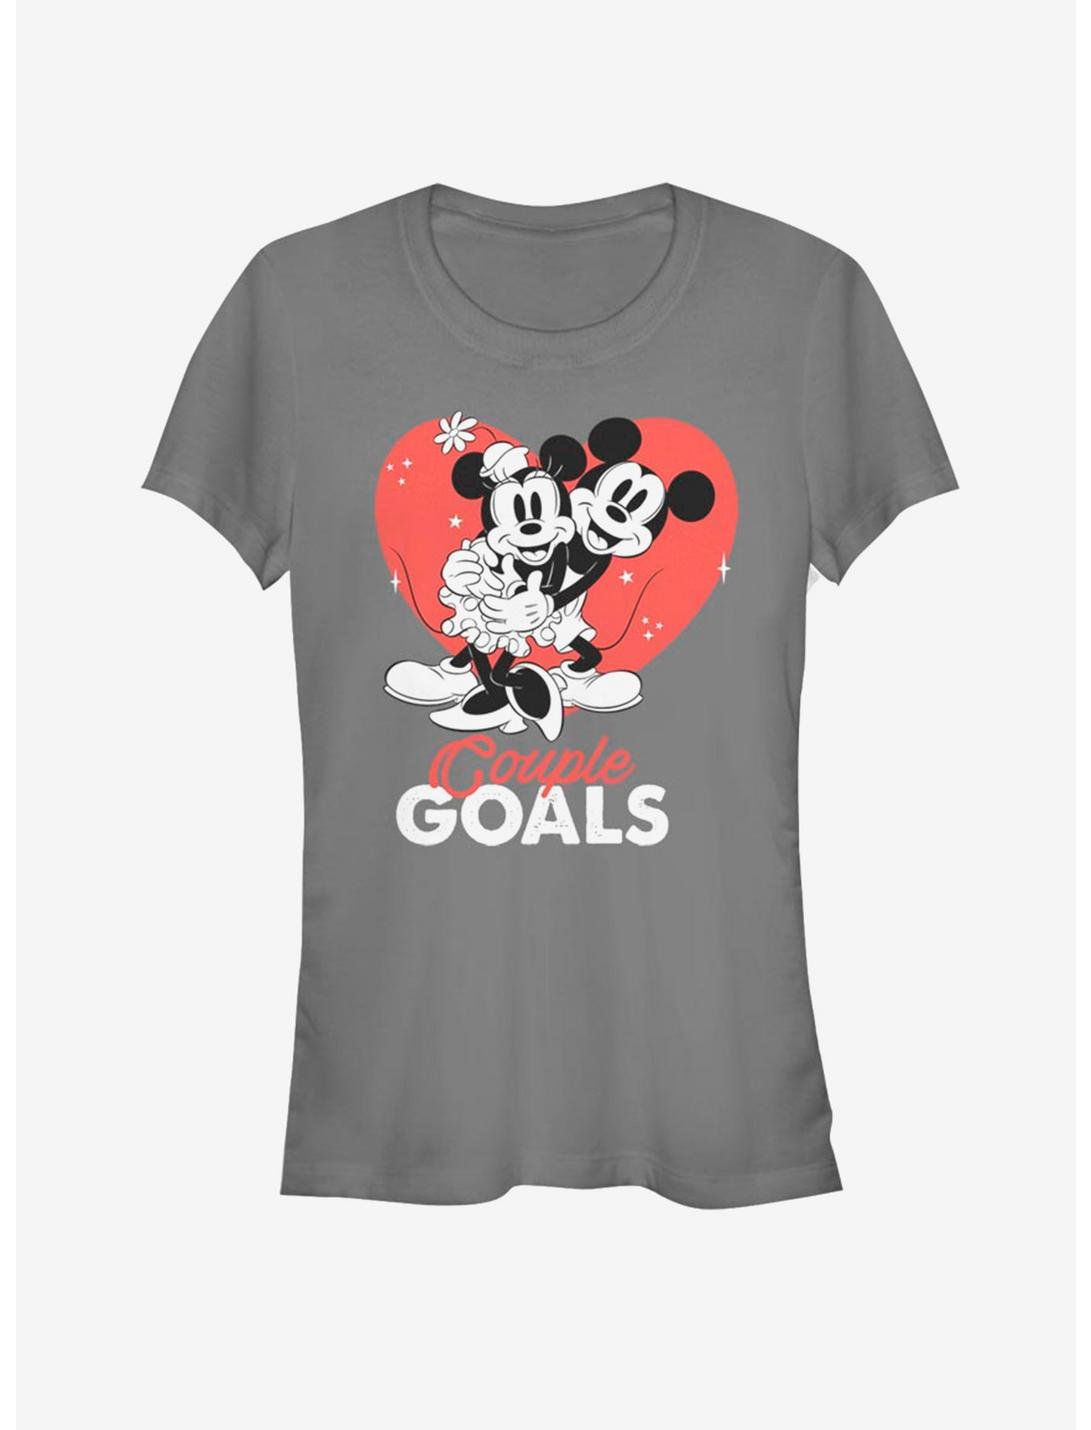 Disney Mickey Mouse & Minnie Mouse Couple Goals Girls T-Shirt, CHARCOAL, hi-res